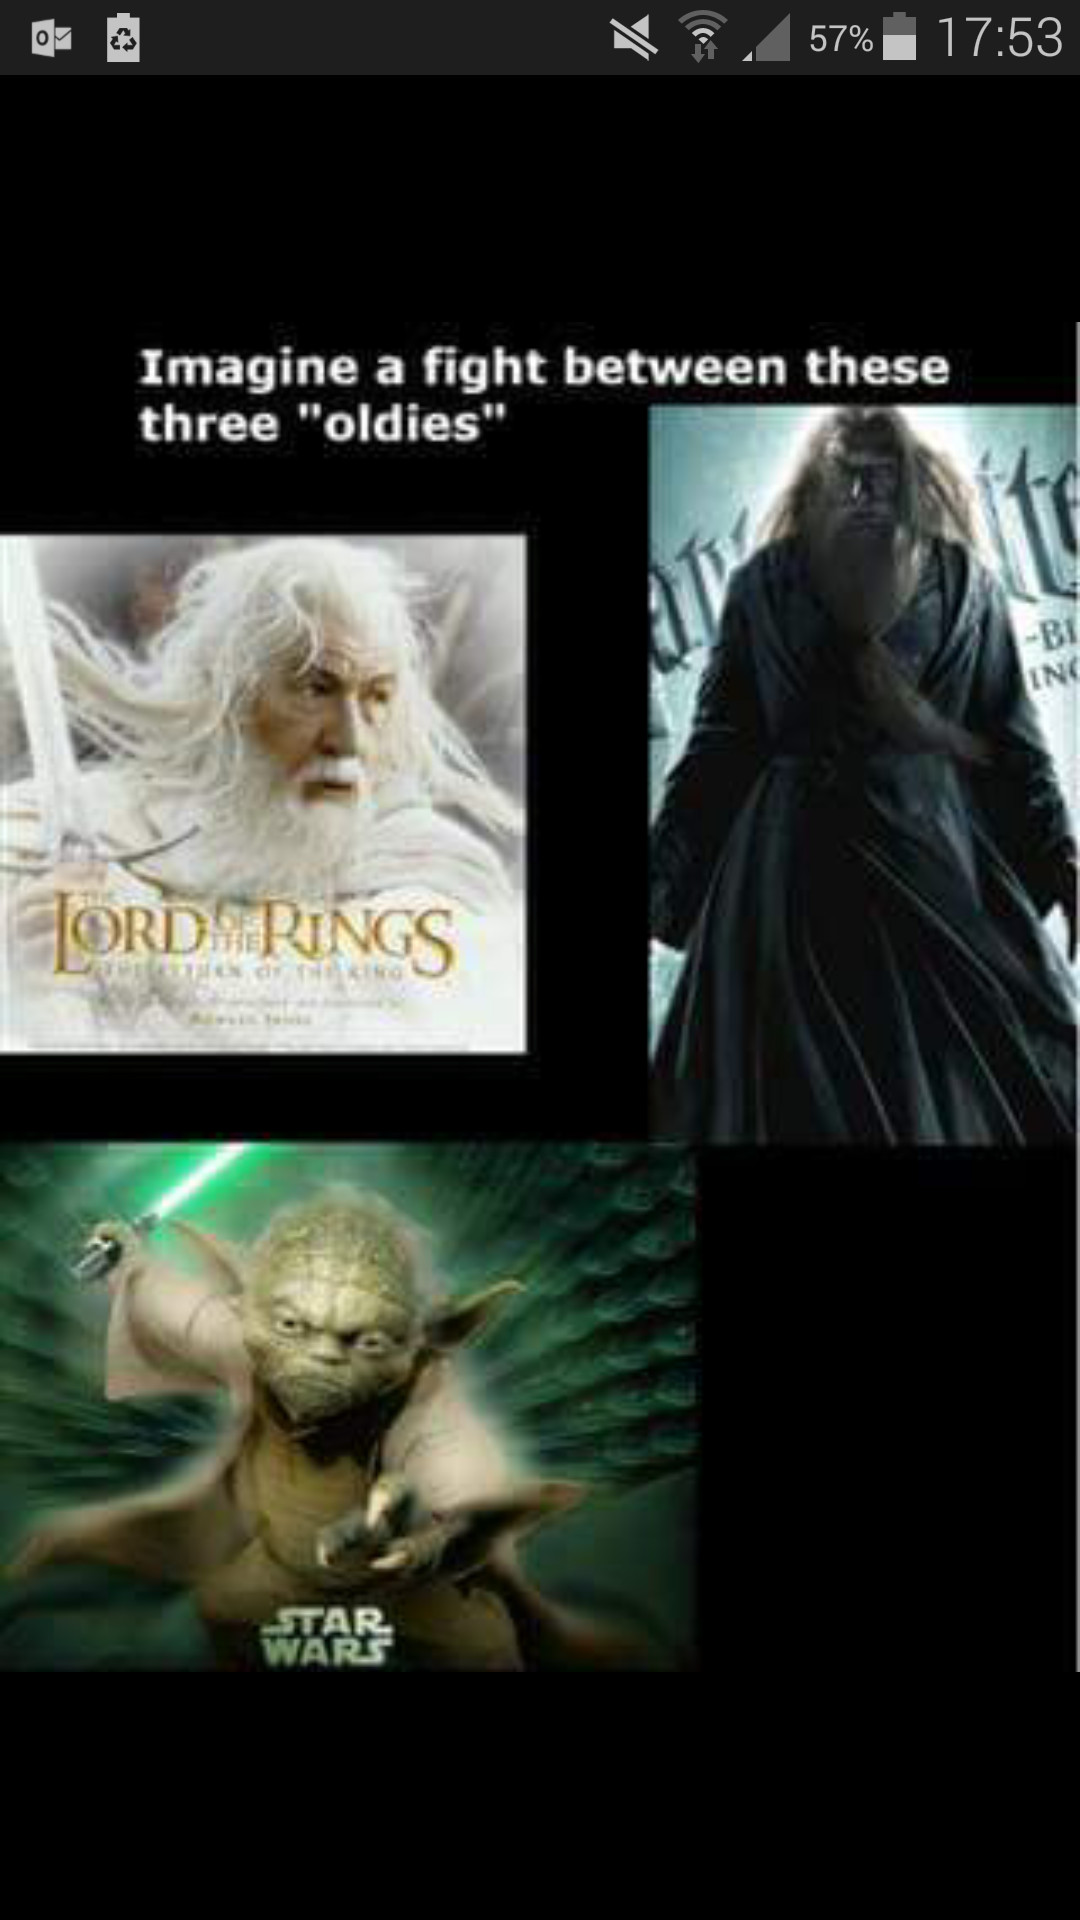 If only Peter Jackson, JK Rowling and George Lucas would would work together to make this happen - meme